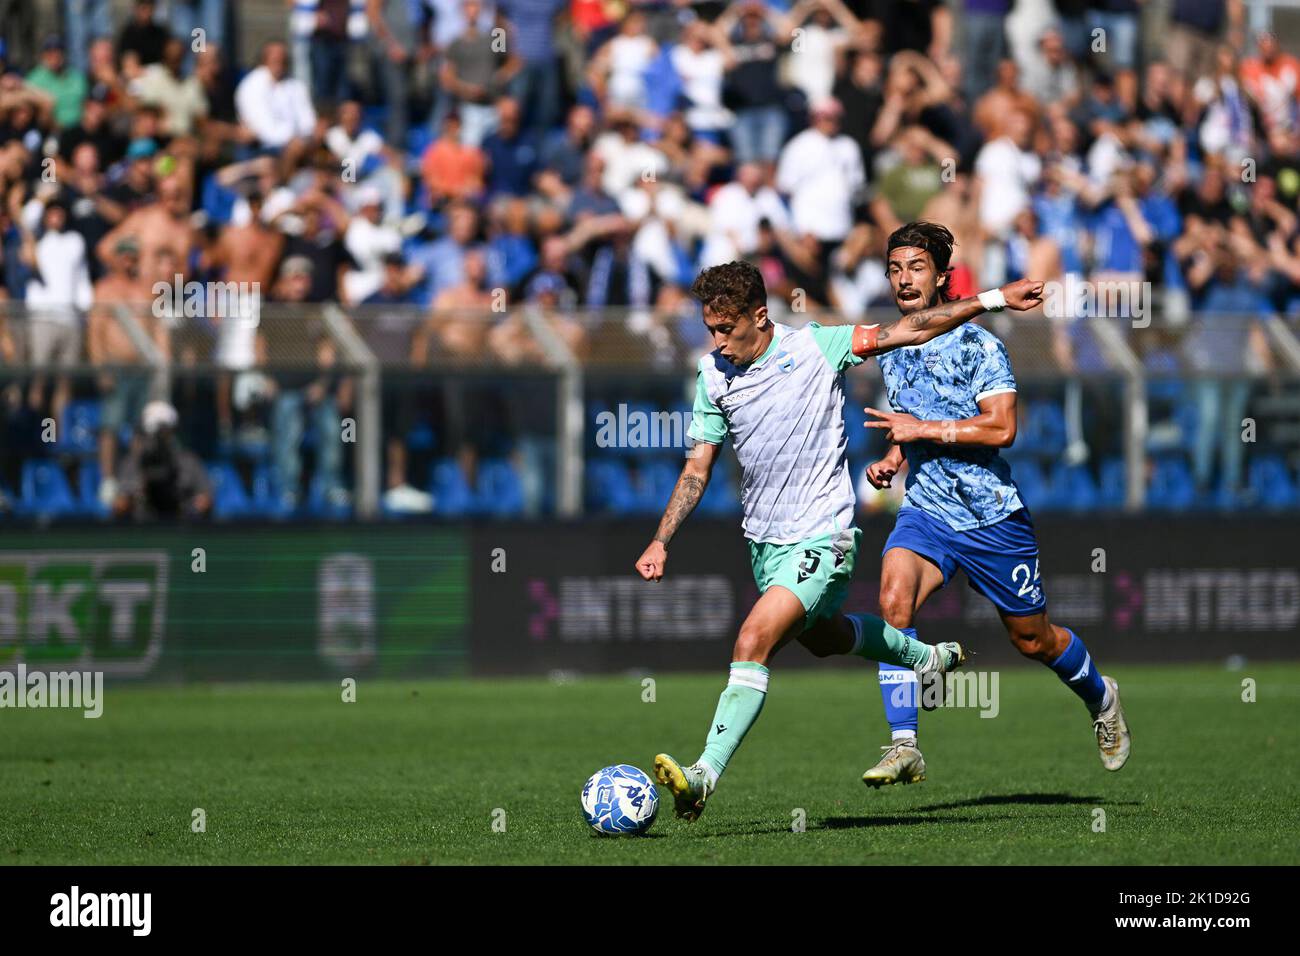 Como Spal enters the pitch during the Italian soccer Serie B match